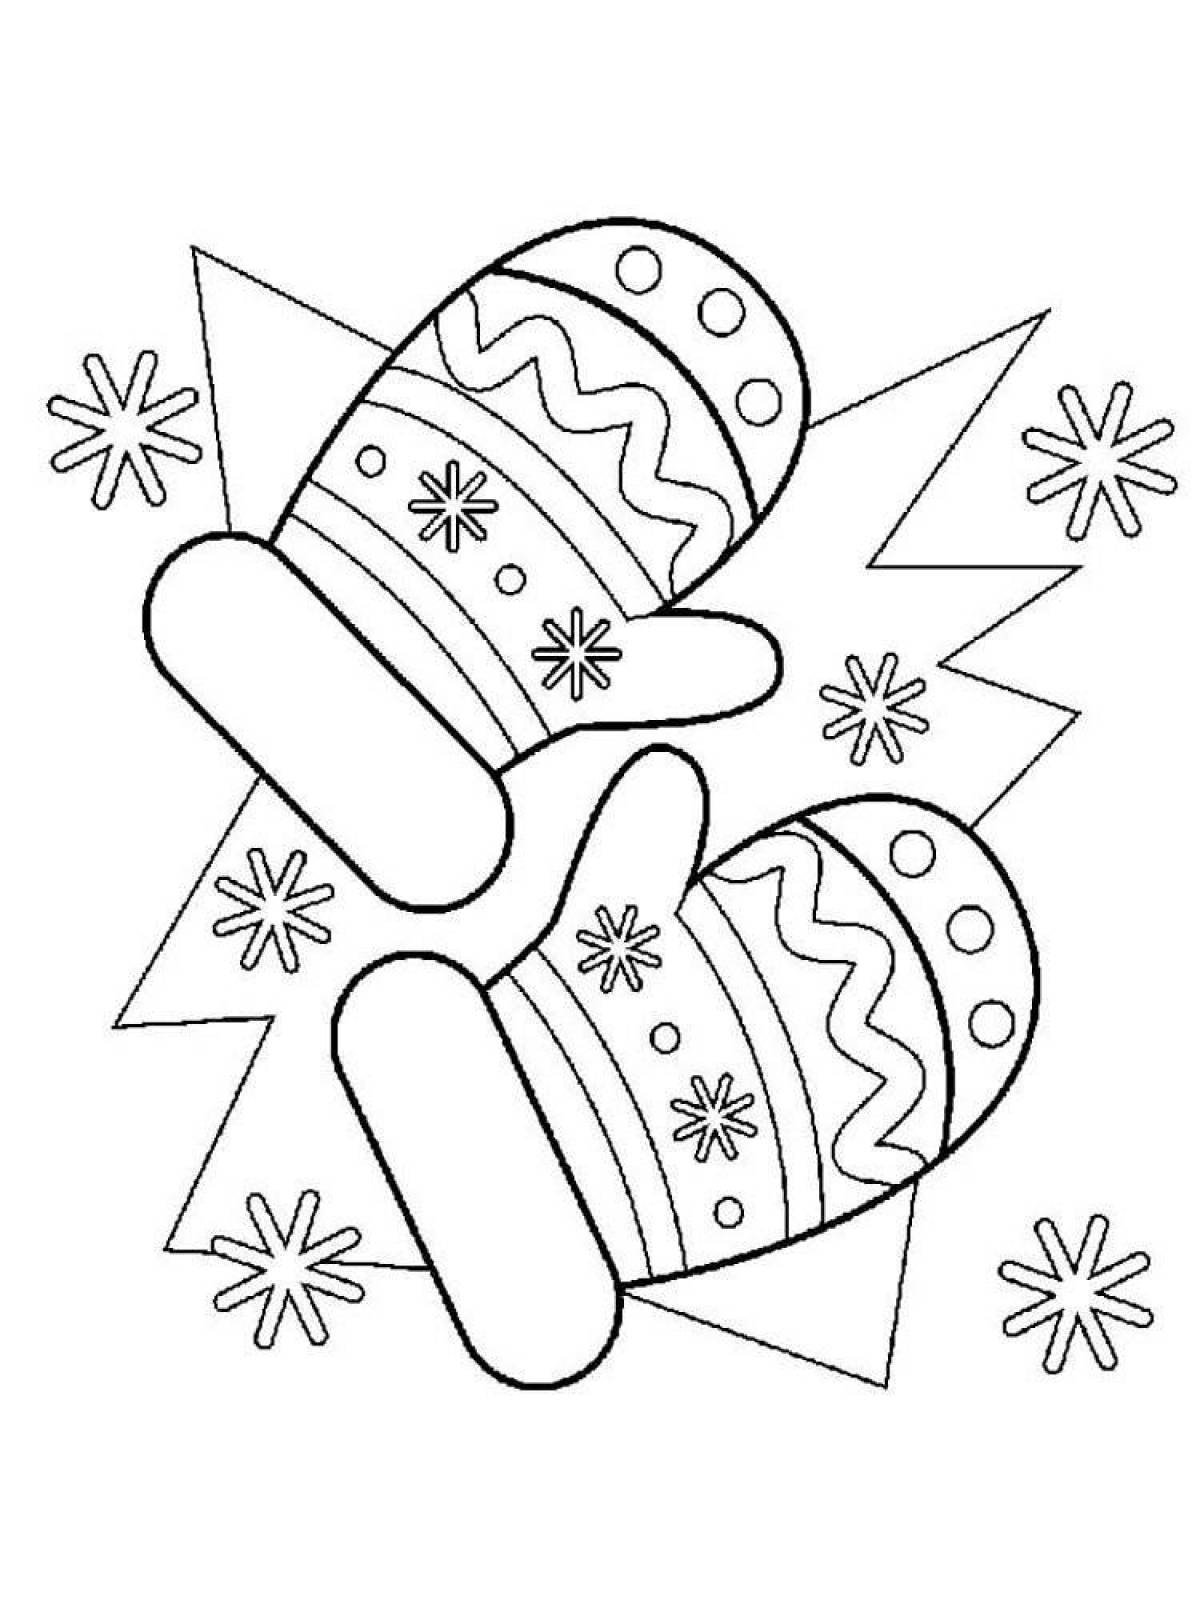 Innovative mittens coloring book for 3-4 year olds